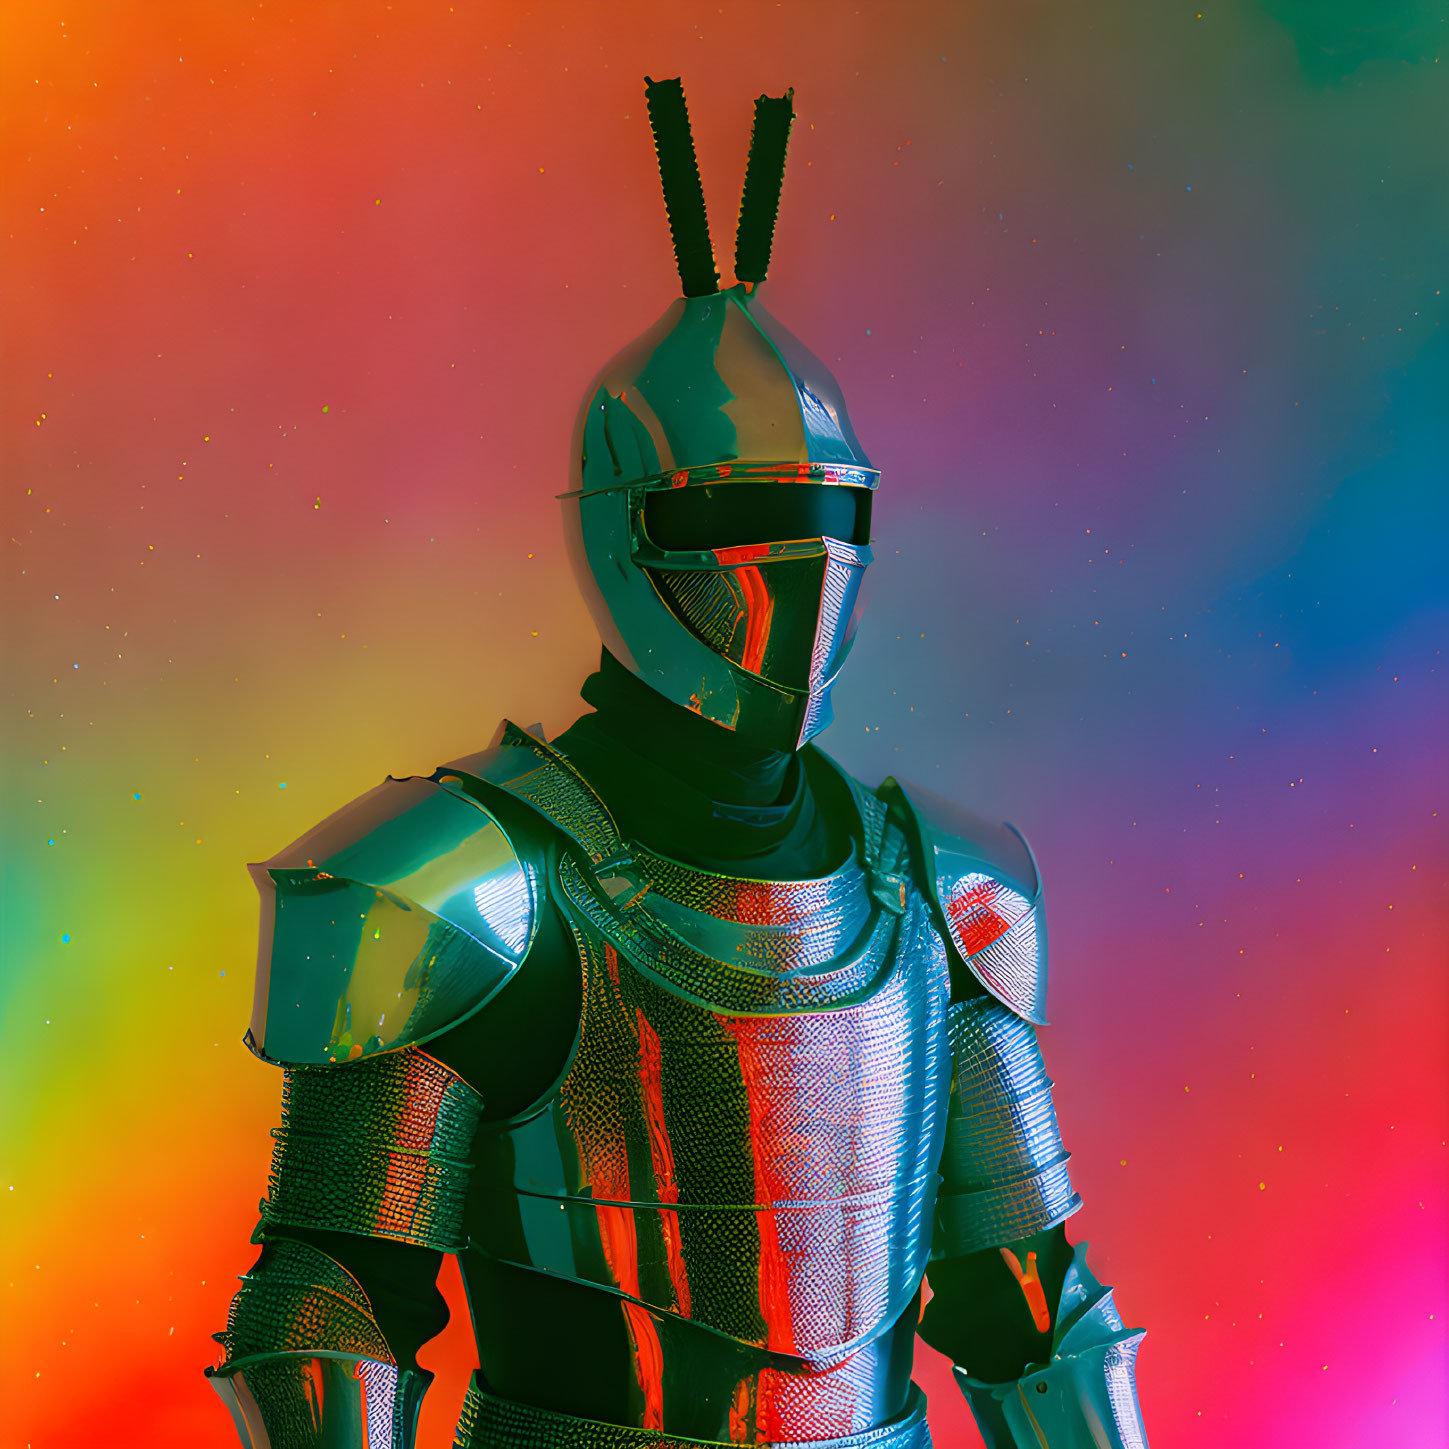 Medieval knight in armor on vibrant duotone background